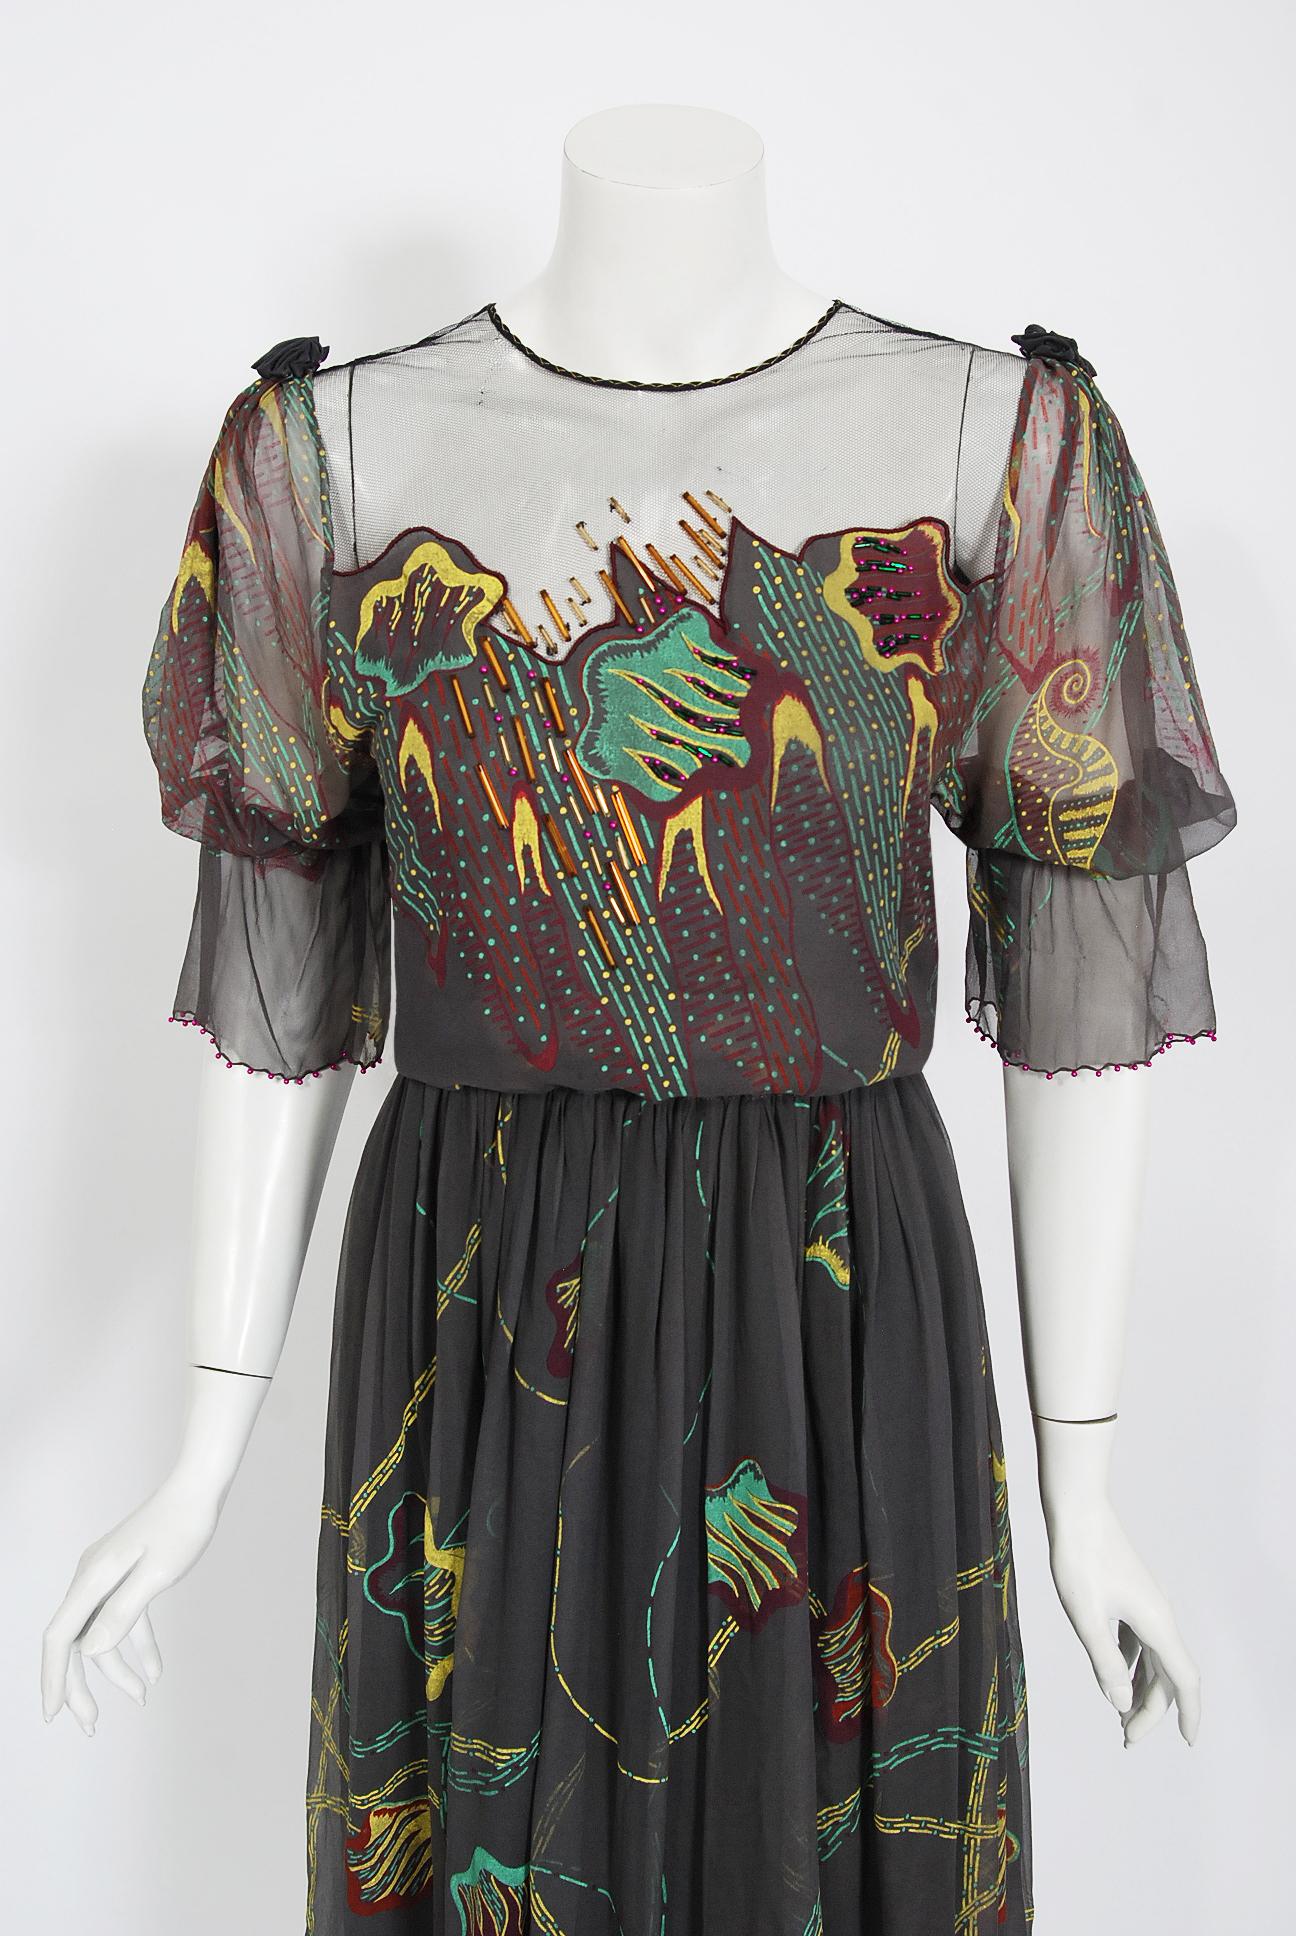 Zandra Rhodes was one of the British designers who put London at the forefront of the international fashion scene in the 1970's. This gorgeous dove grey hand-painted dress dates back to her 1977 couture collection. Her designs are considered